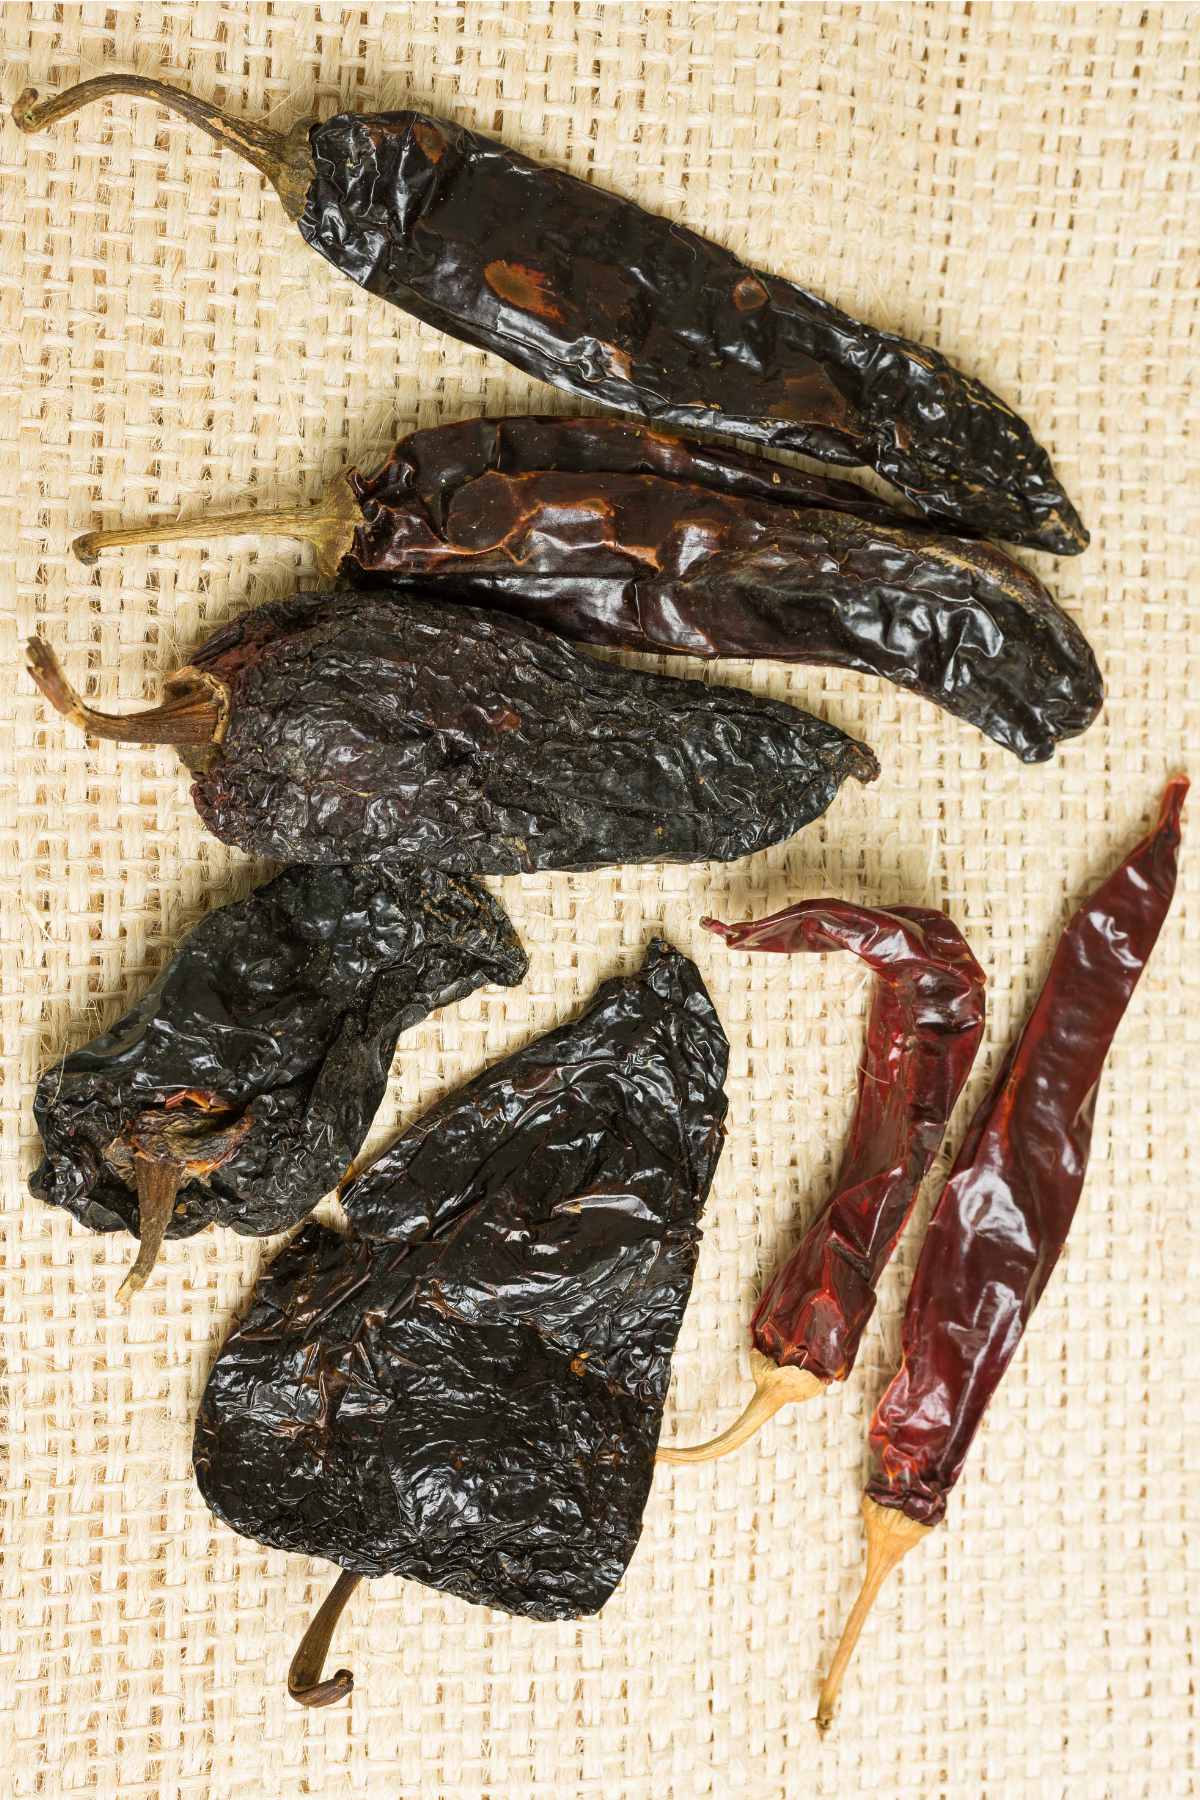 Mexican chiles